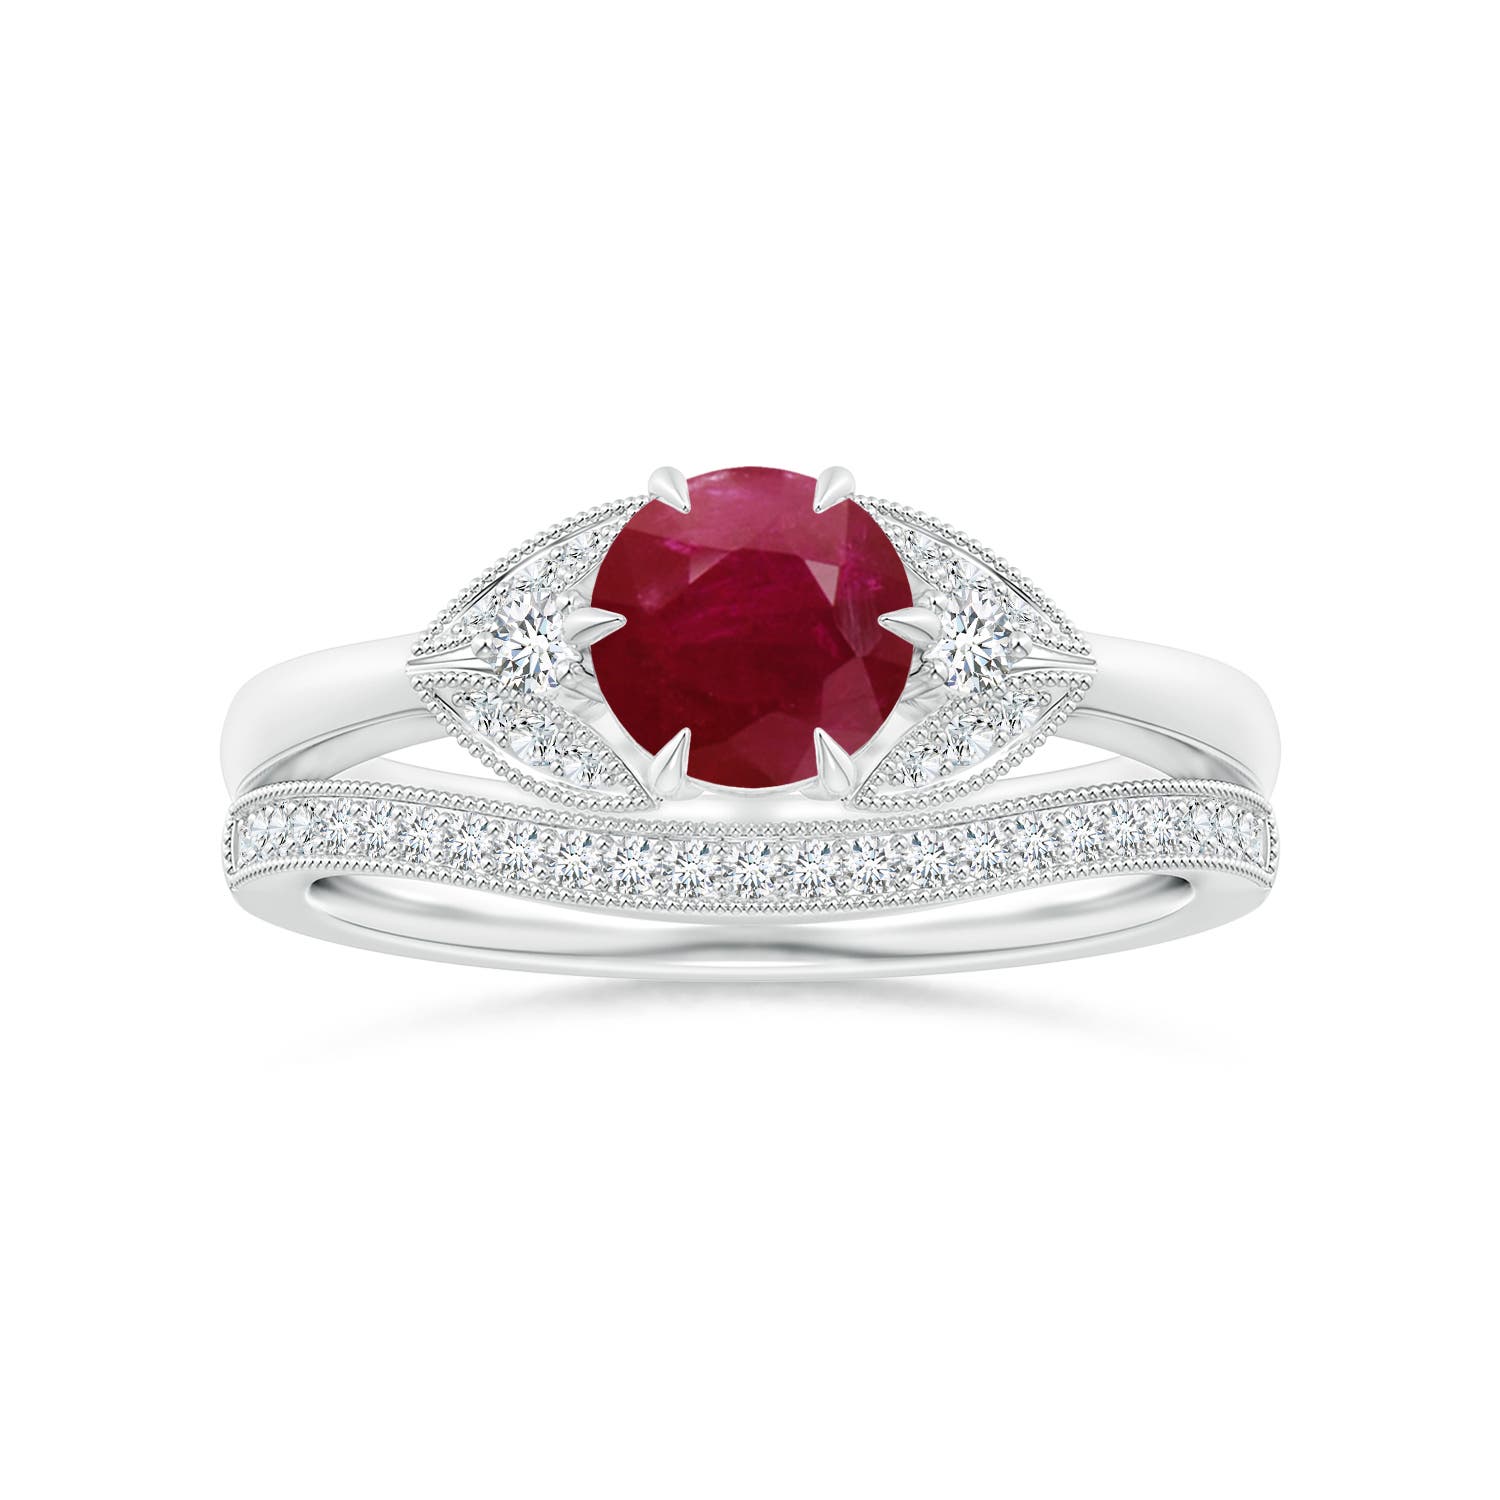 A - Ruby / 1.1 CT / 14 KT White Gold